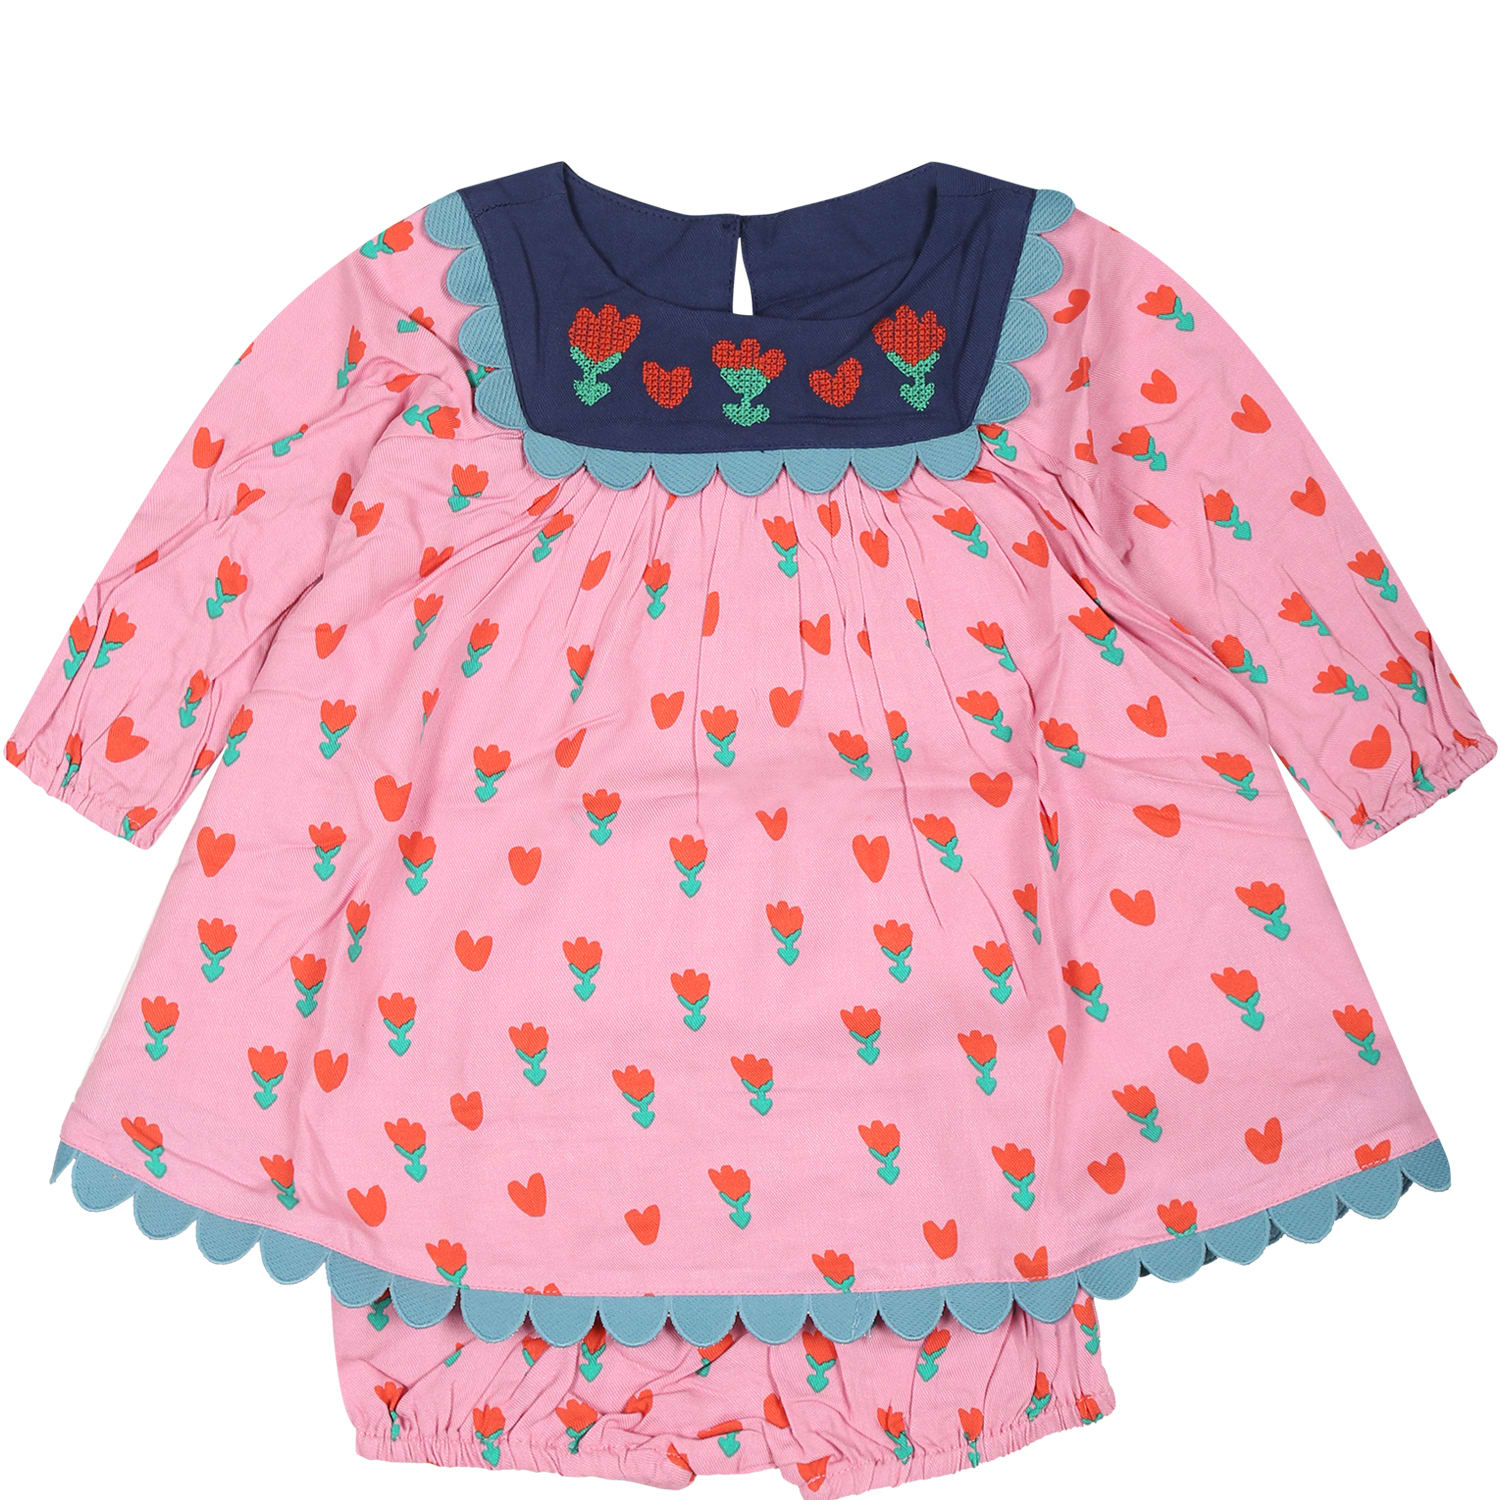 STELLA MCCARTNEY PINK DRESS FOR BABY GIRL WITH TULIP PRINT